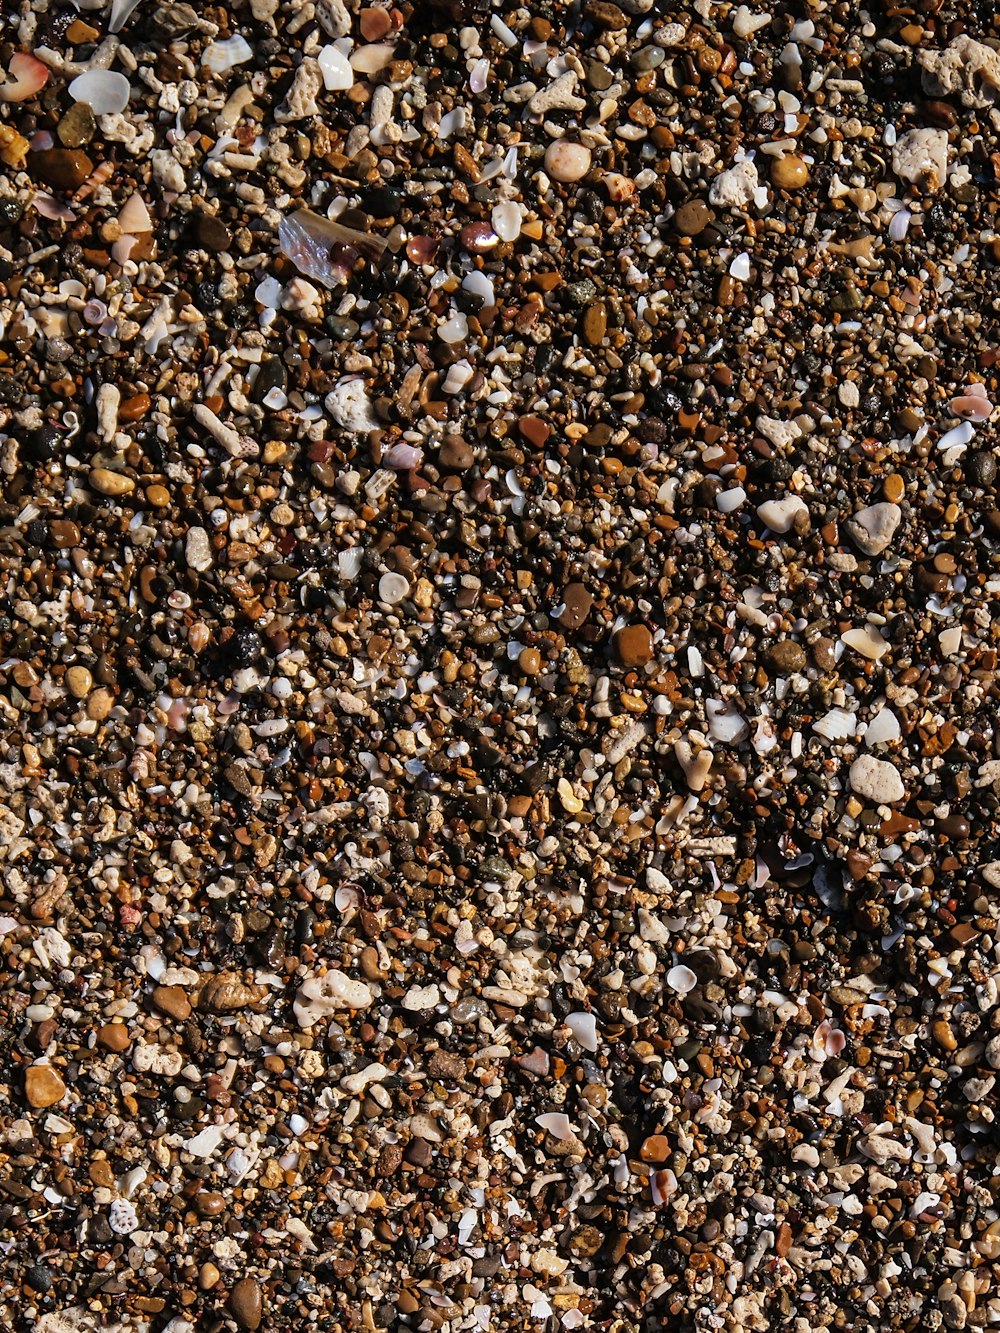 a close up of rocks and gravel on the ground